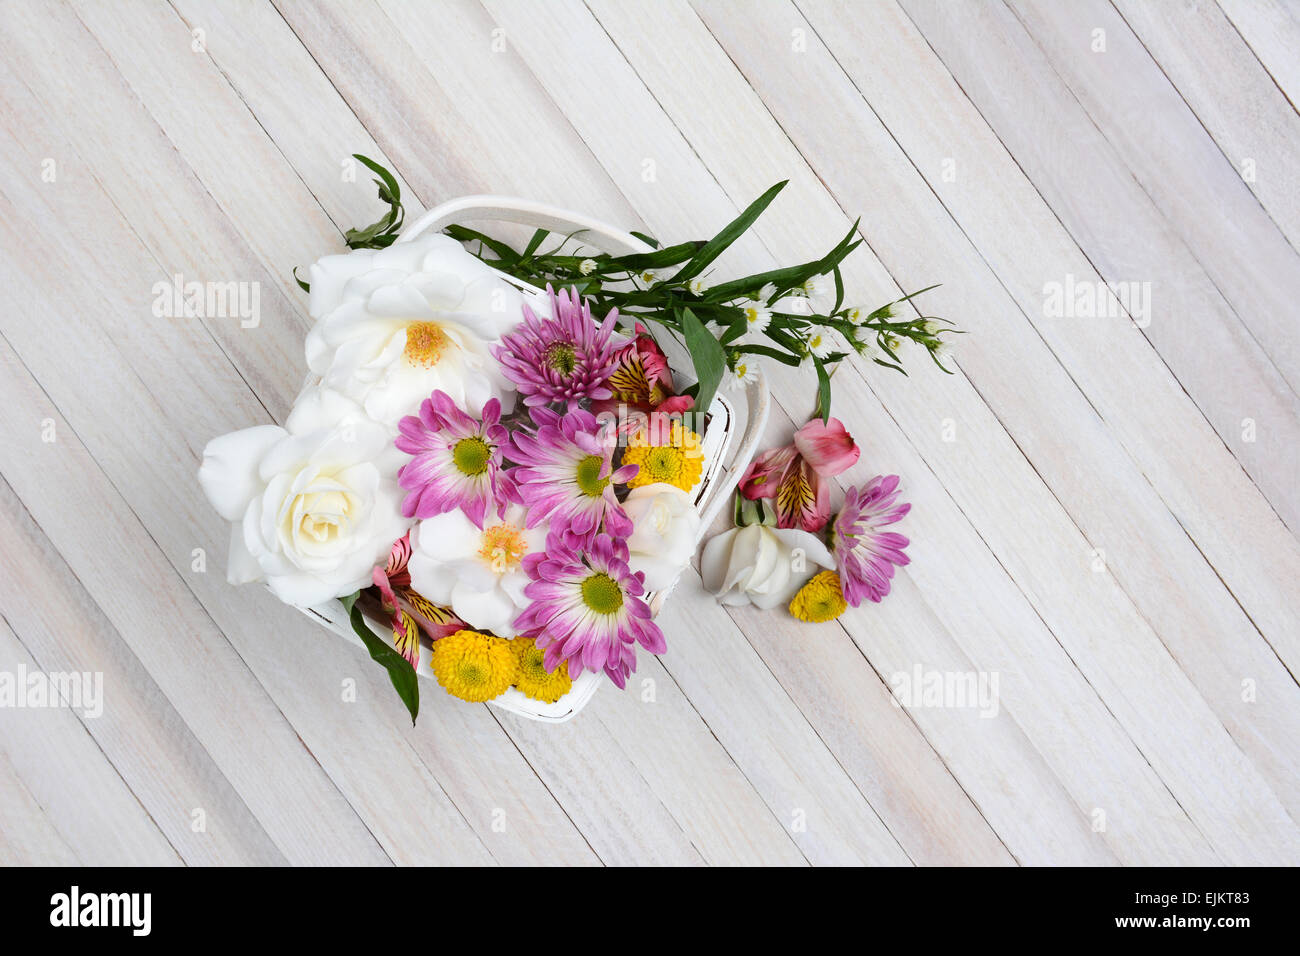 Basket of Spring flowers on a wood table. Overhead shot in horizontal format with copy space. Stock Photo